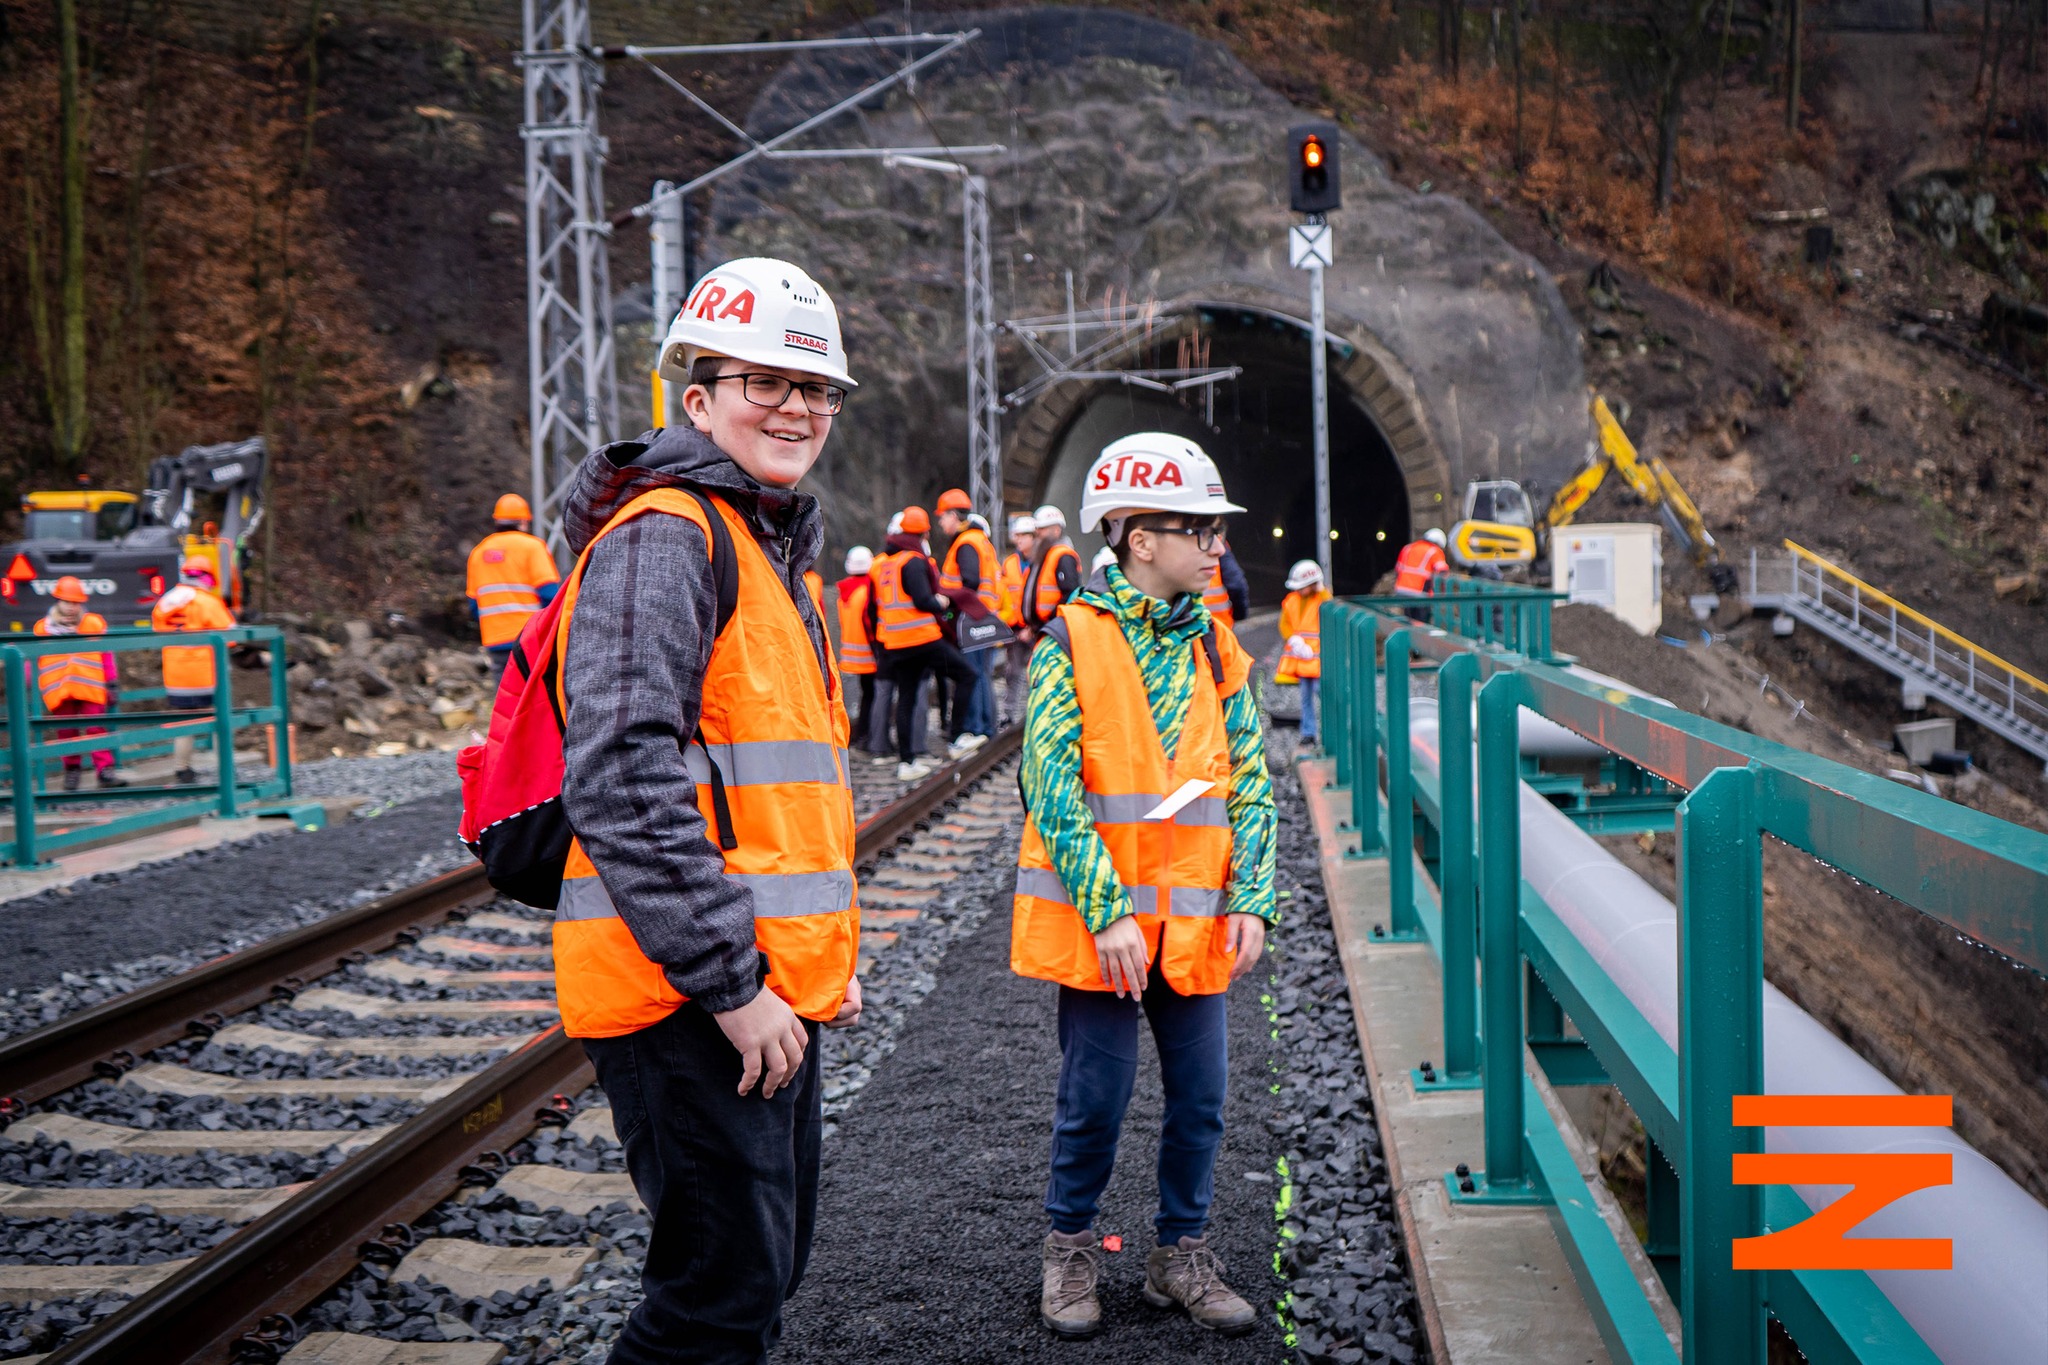 Správa železnic organised an excursion before trains started running on the new bridge and tunnel